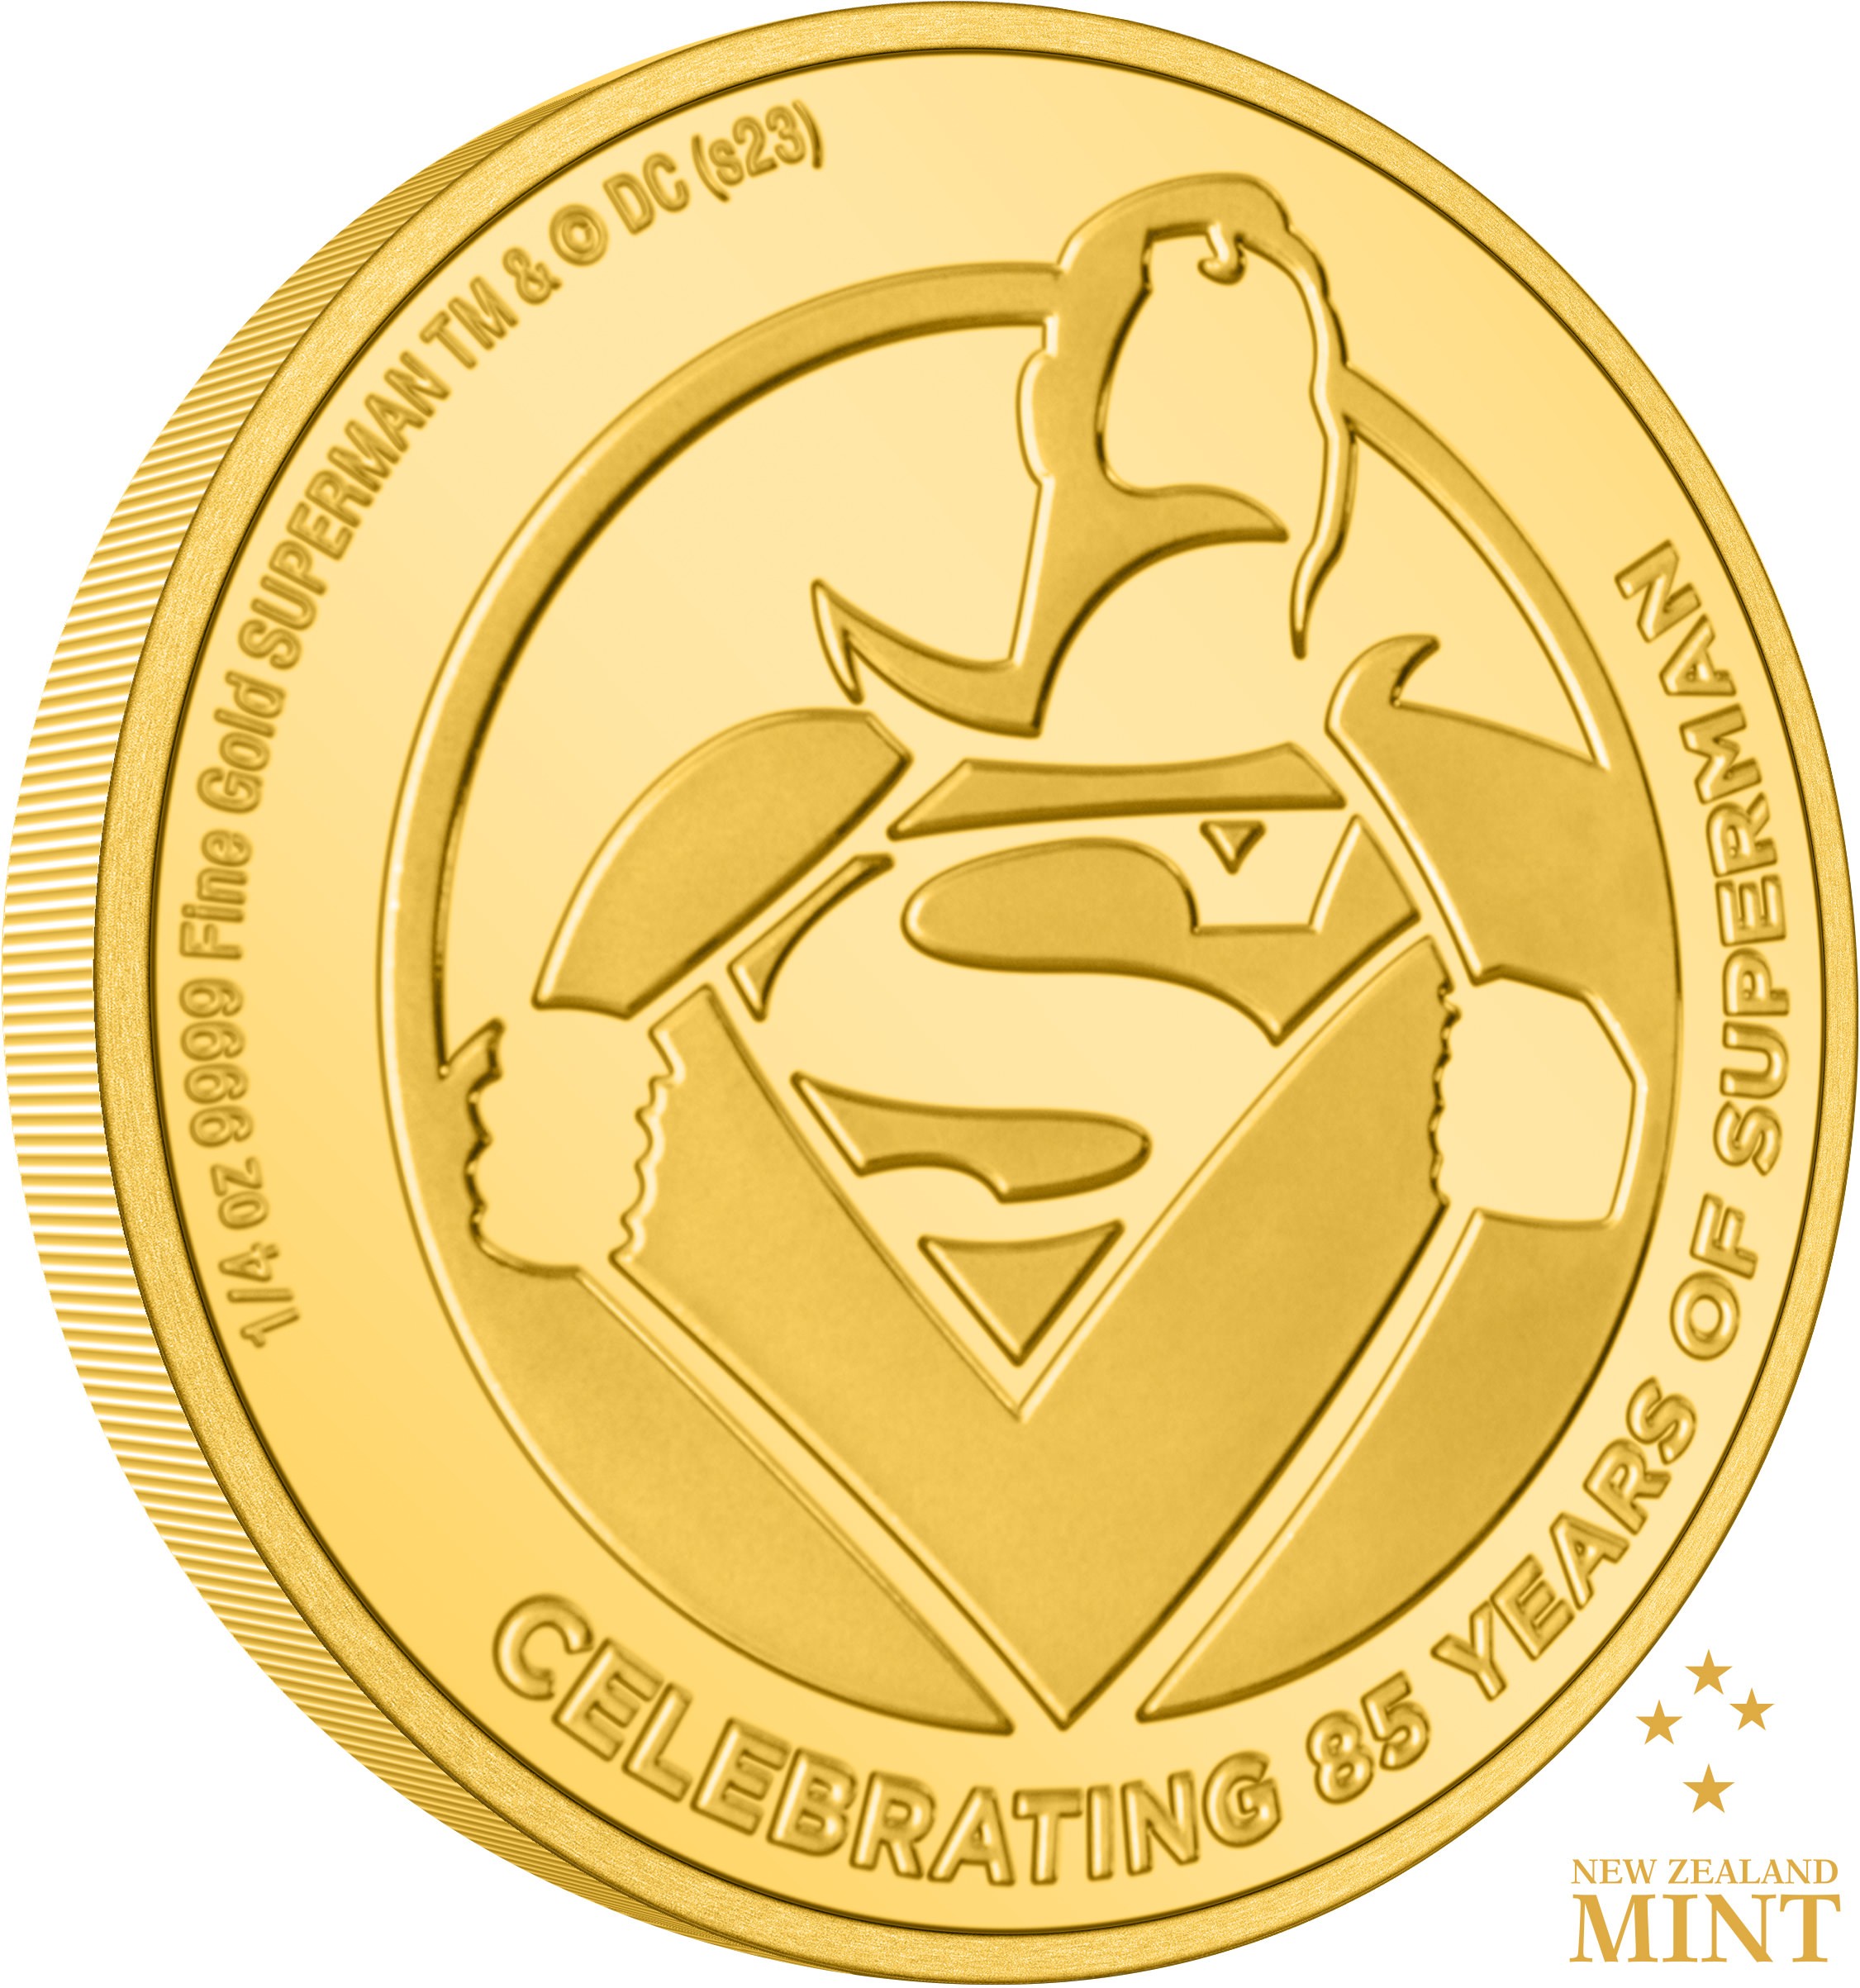 Superman 85th Anniversary ¼oz Gold Coin (Prototype Shown) View 3